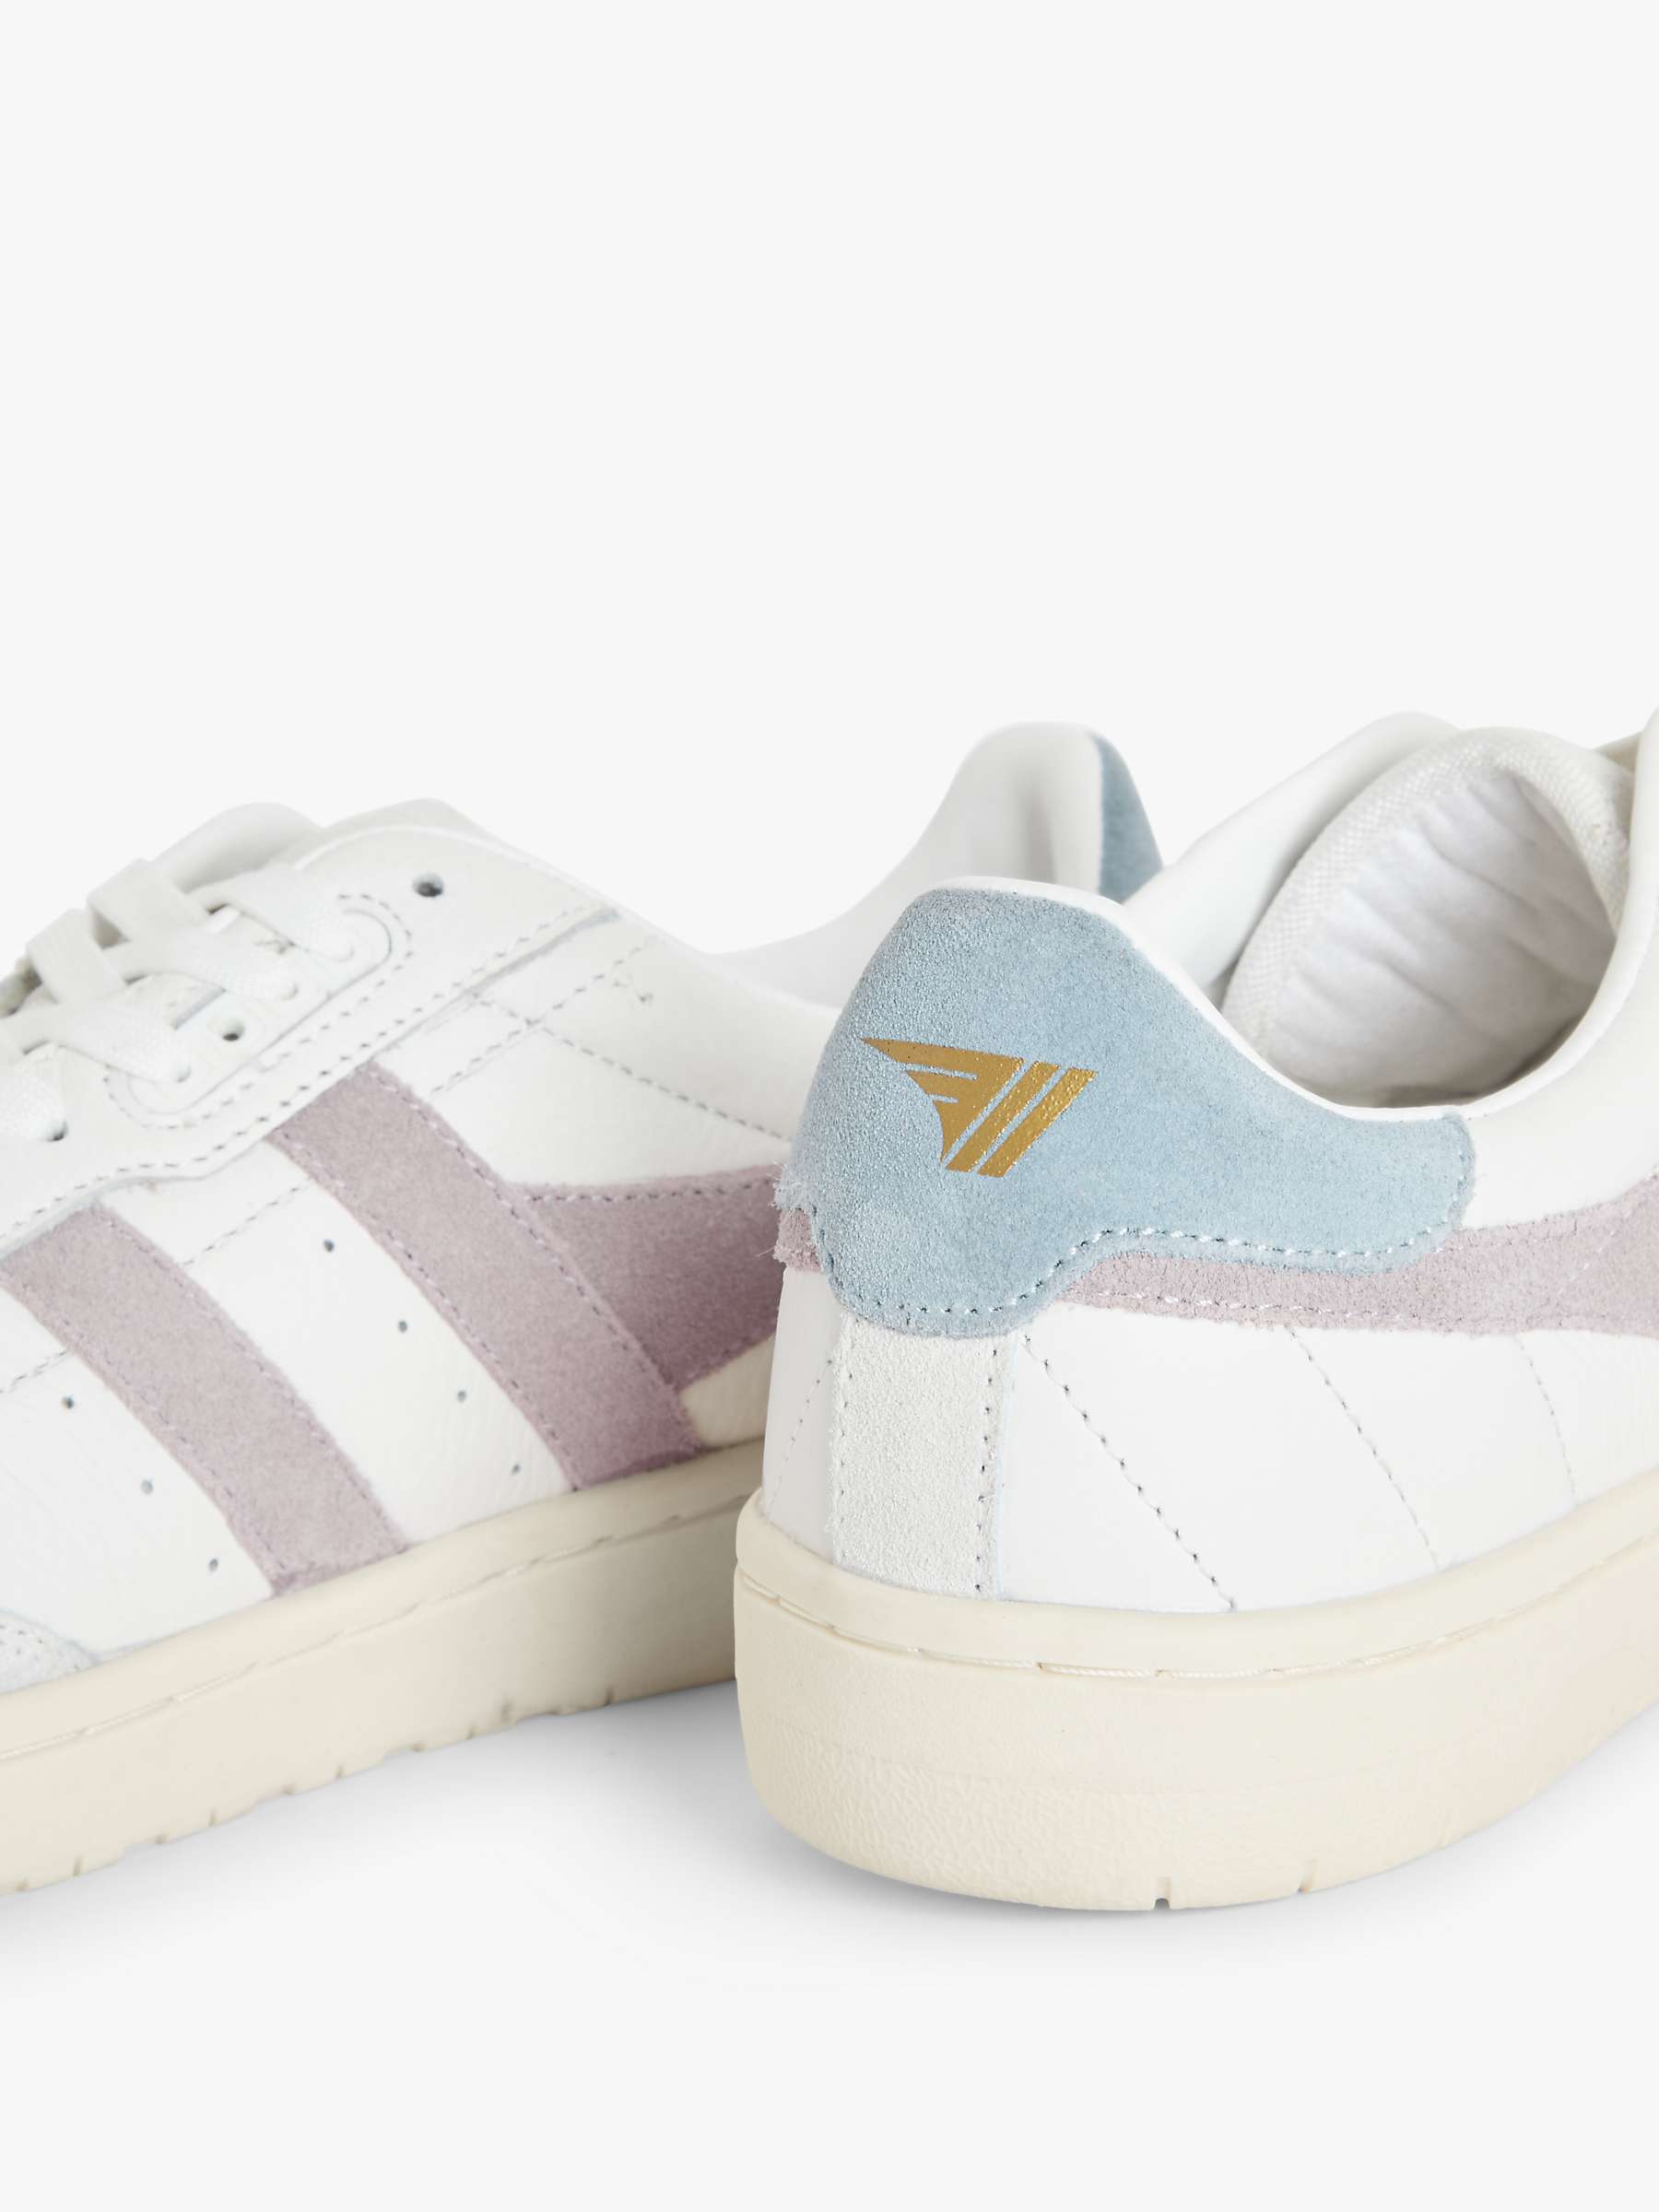 Buy Gola Falcon Leather Trainers Online at johnlewis.com